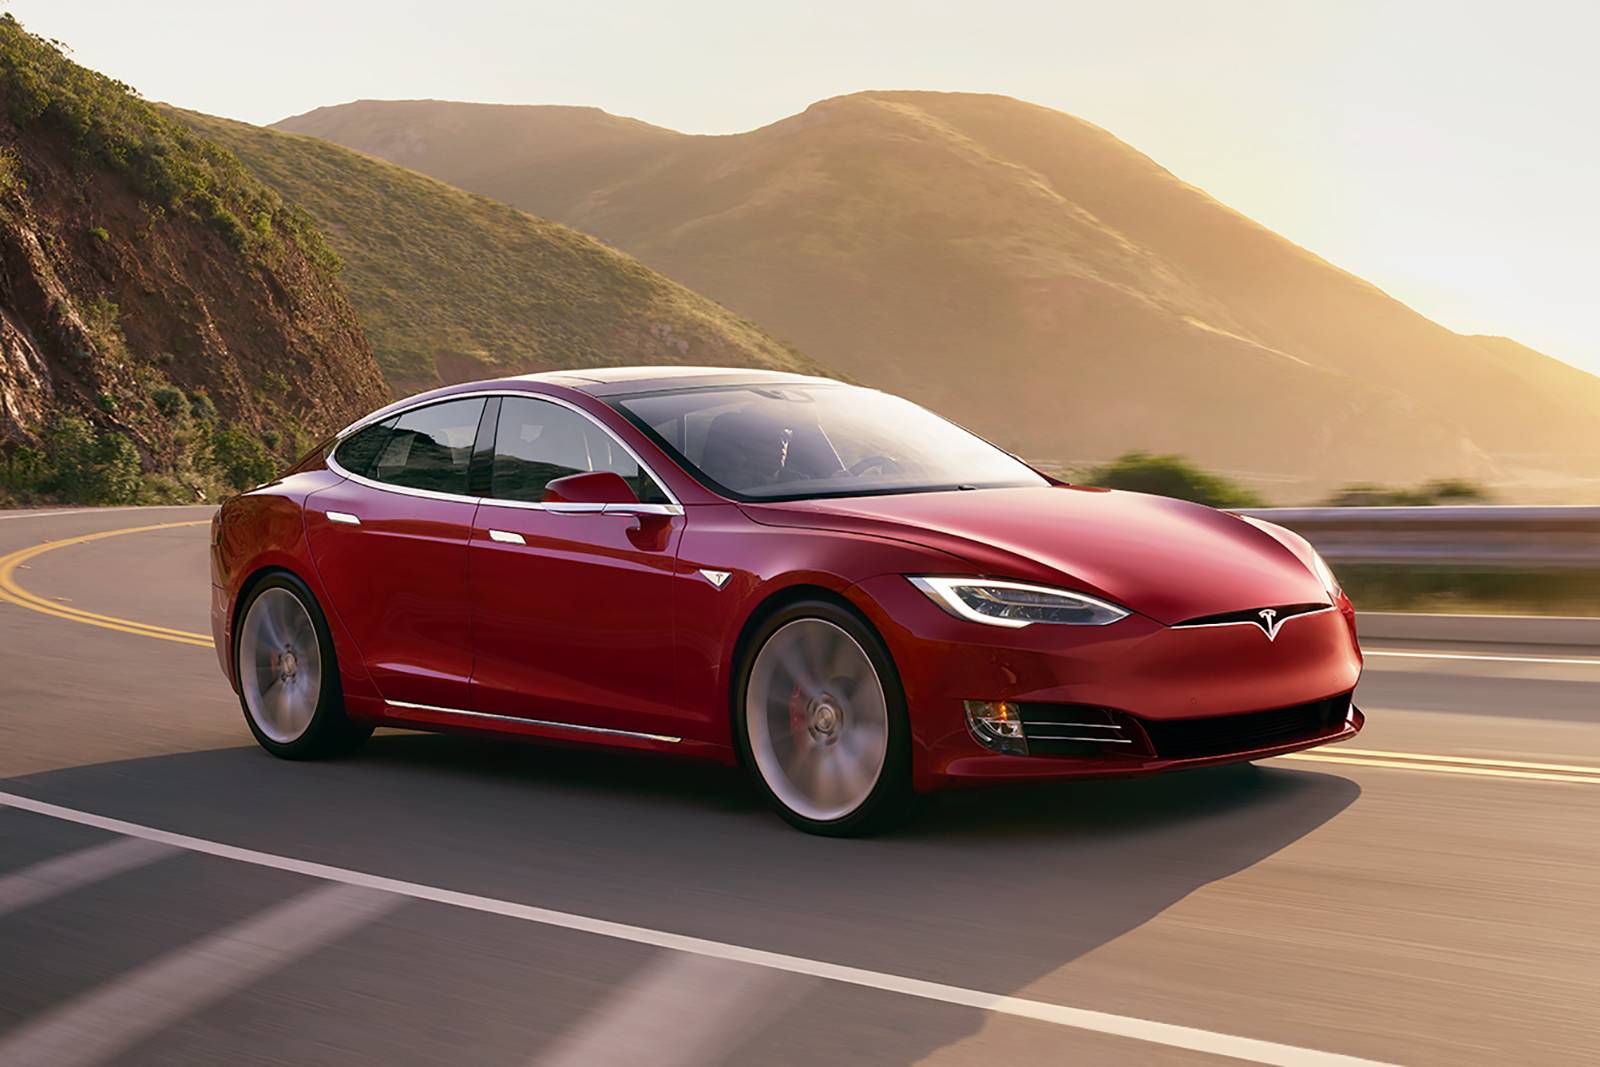 A red Tesla Model S driving in a road by the mountains